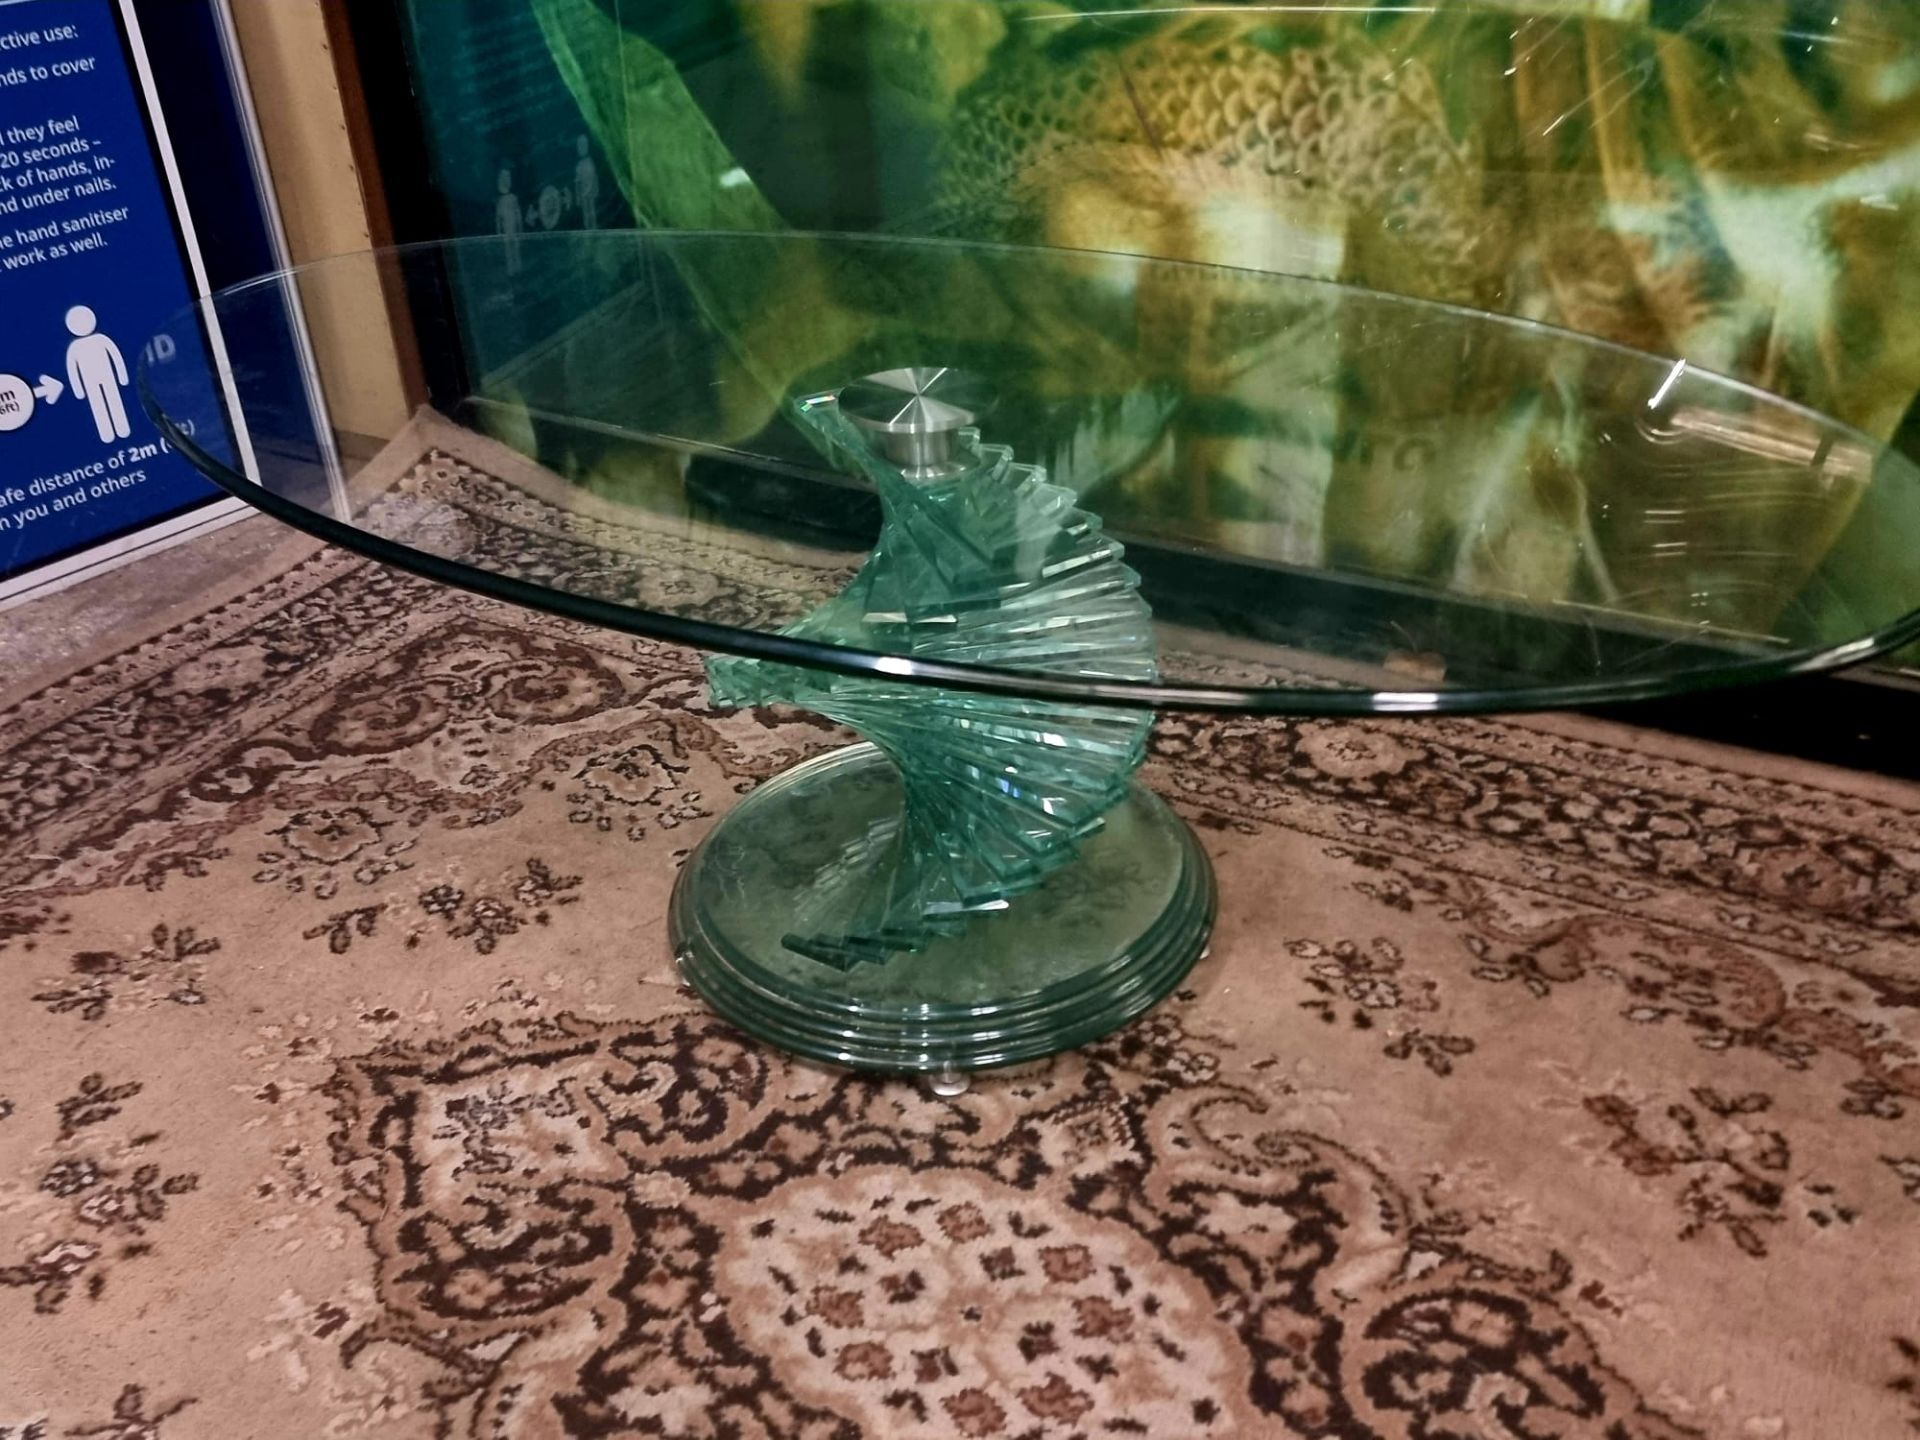 Ravello Spiral Glass Italian Design Ovoid Coffee Table A Mid Century Design Table With A Light Green - Image 4 of 8